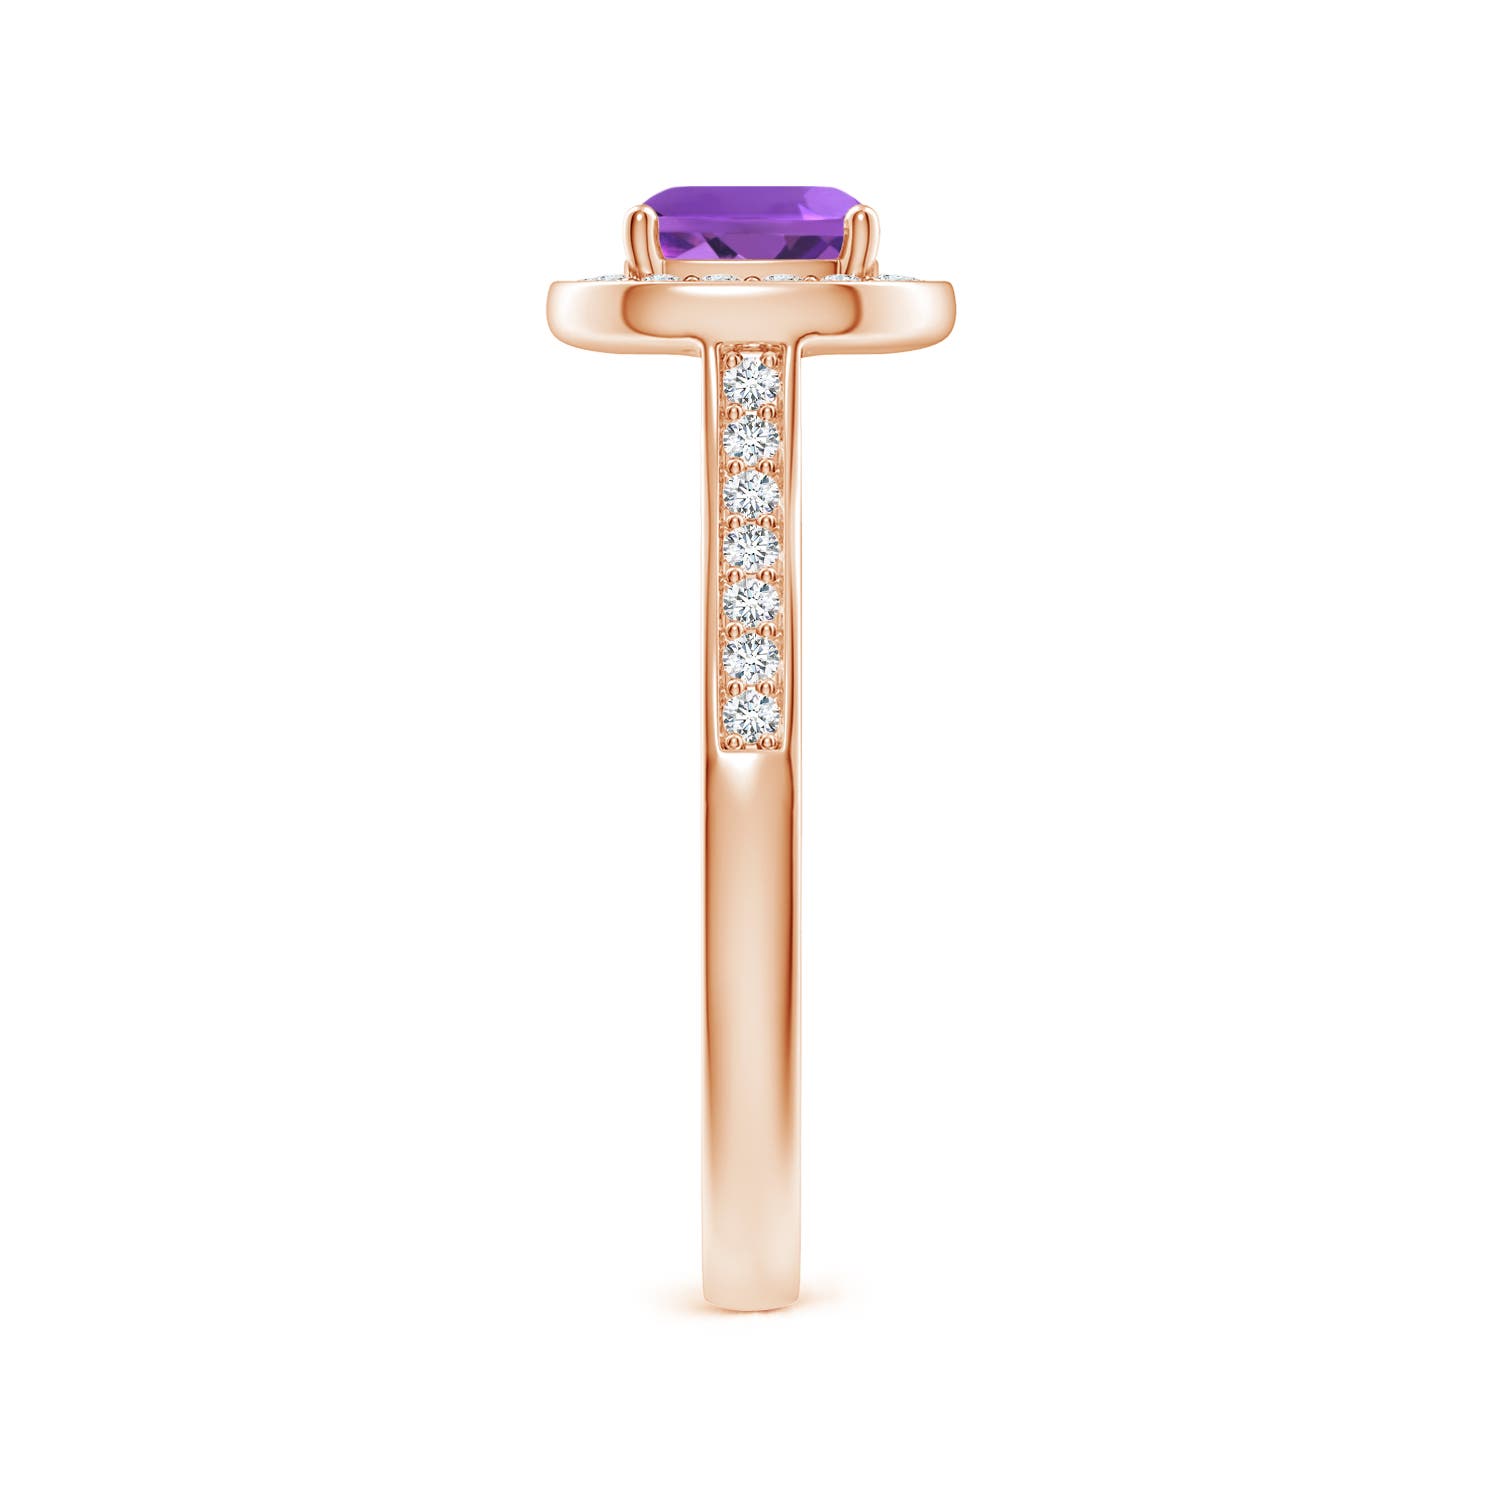 AAA - Amethyst / 1.08 CT / 14 KT Rose Gold